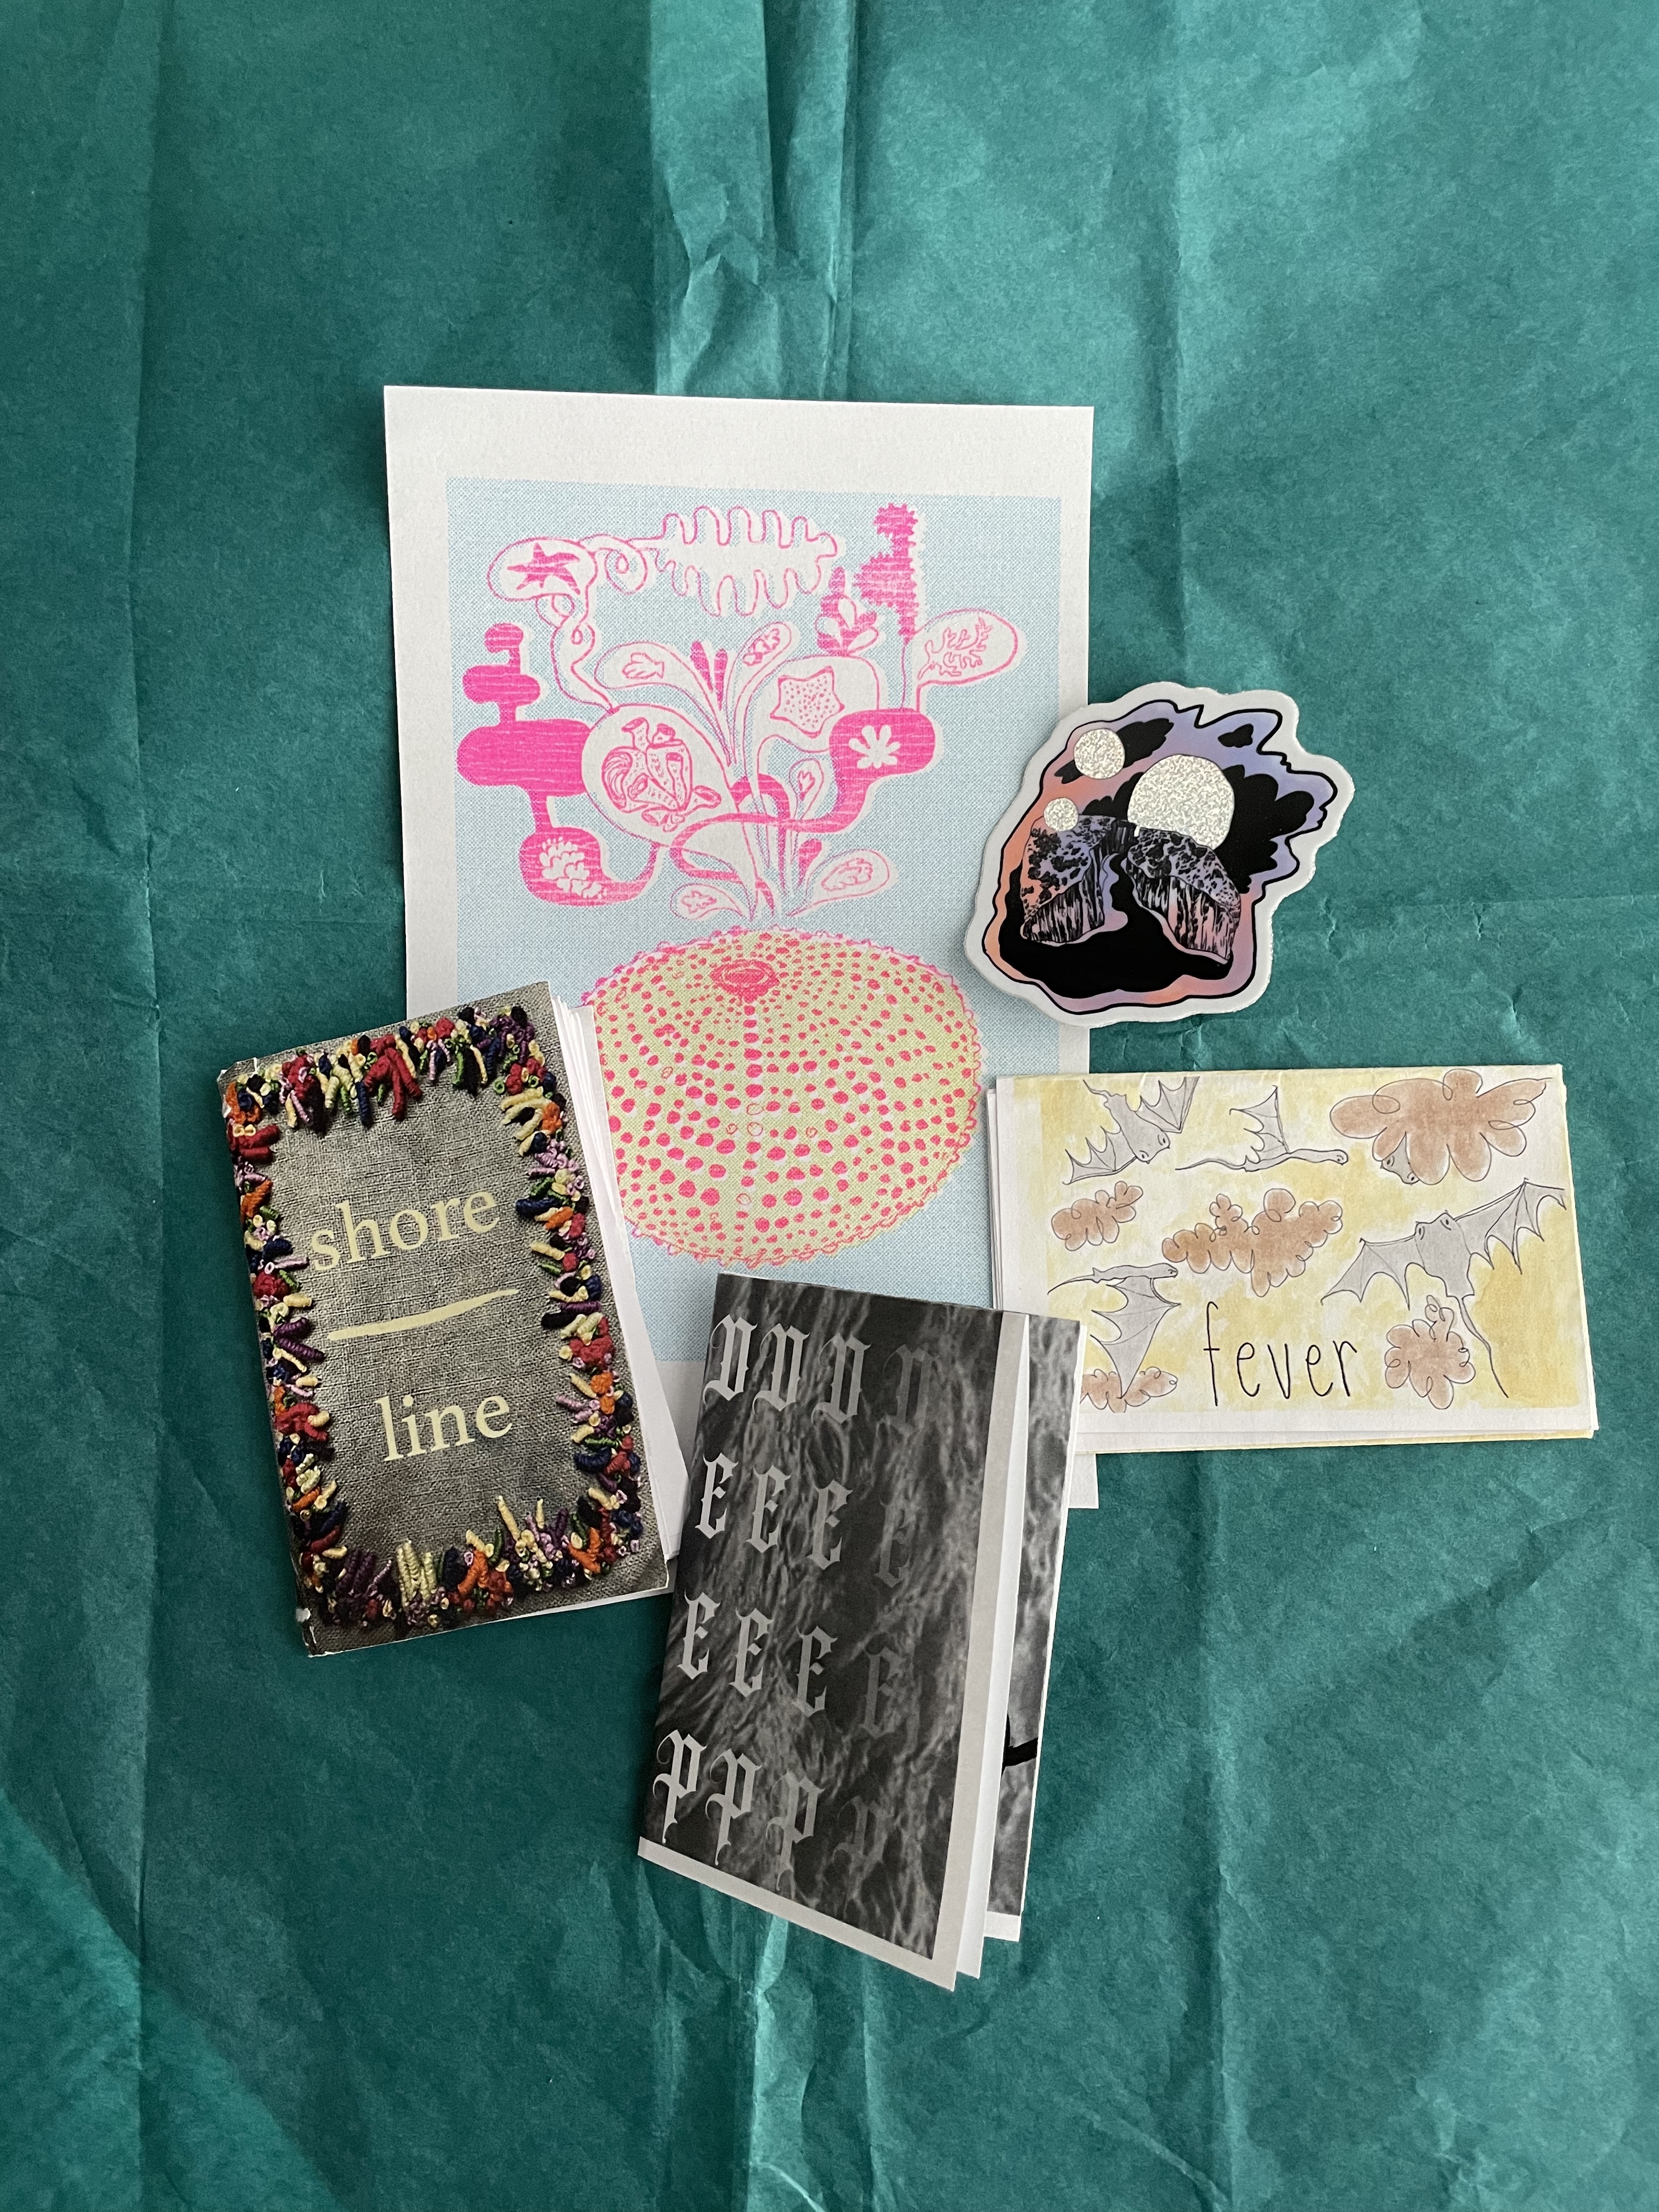 a collection of zines and artwork against a teal background